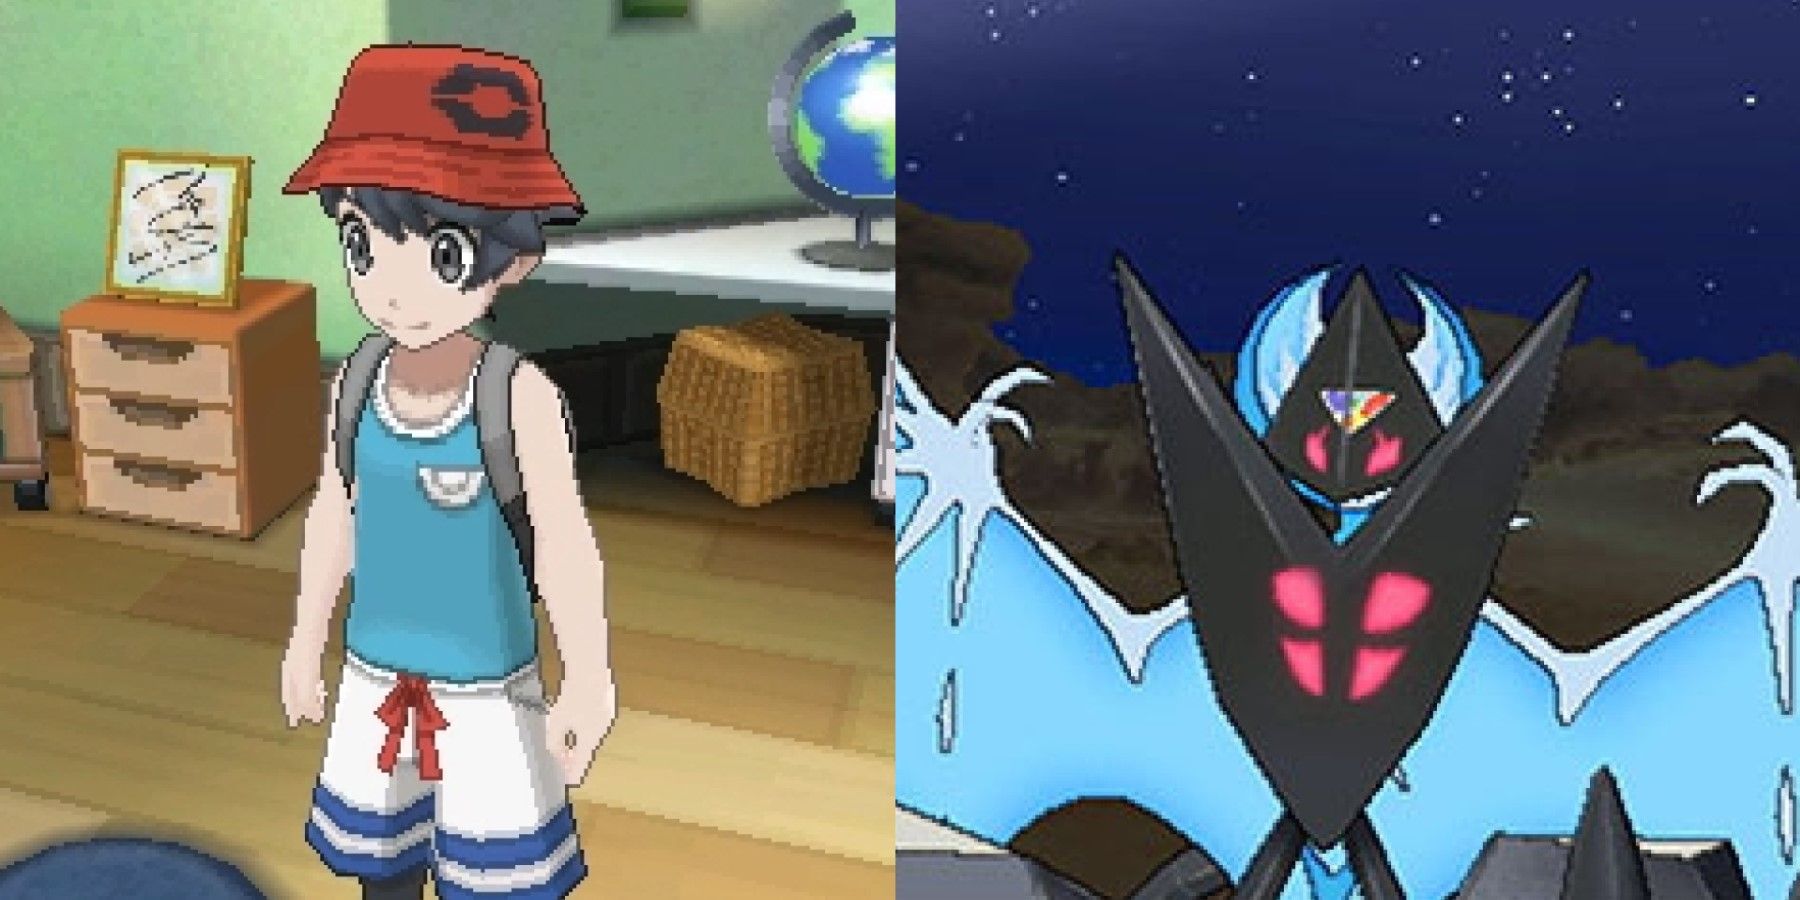 Pokemon Ultra Sun and Ultra Moon Were the Perfect SendOff for the Nintendo 3DS